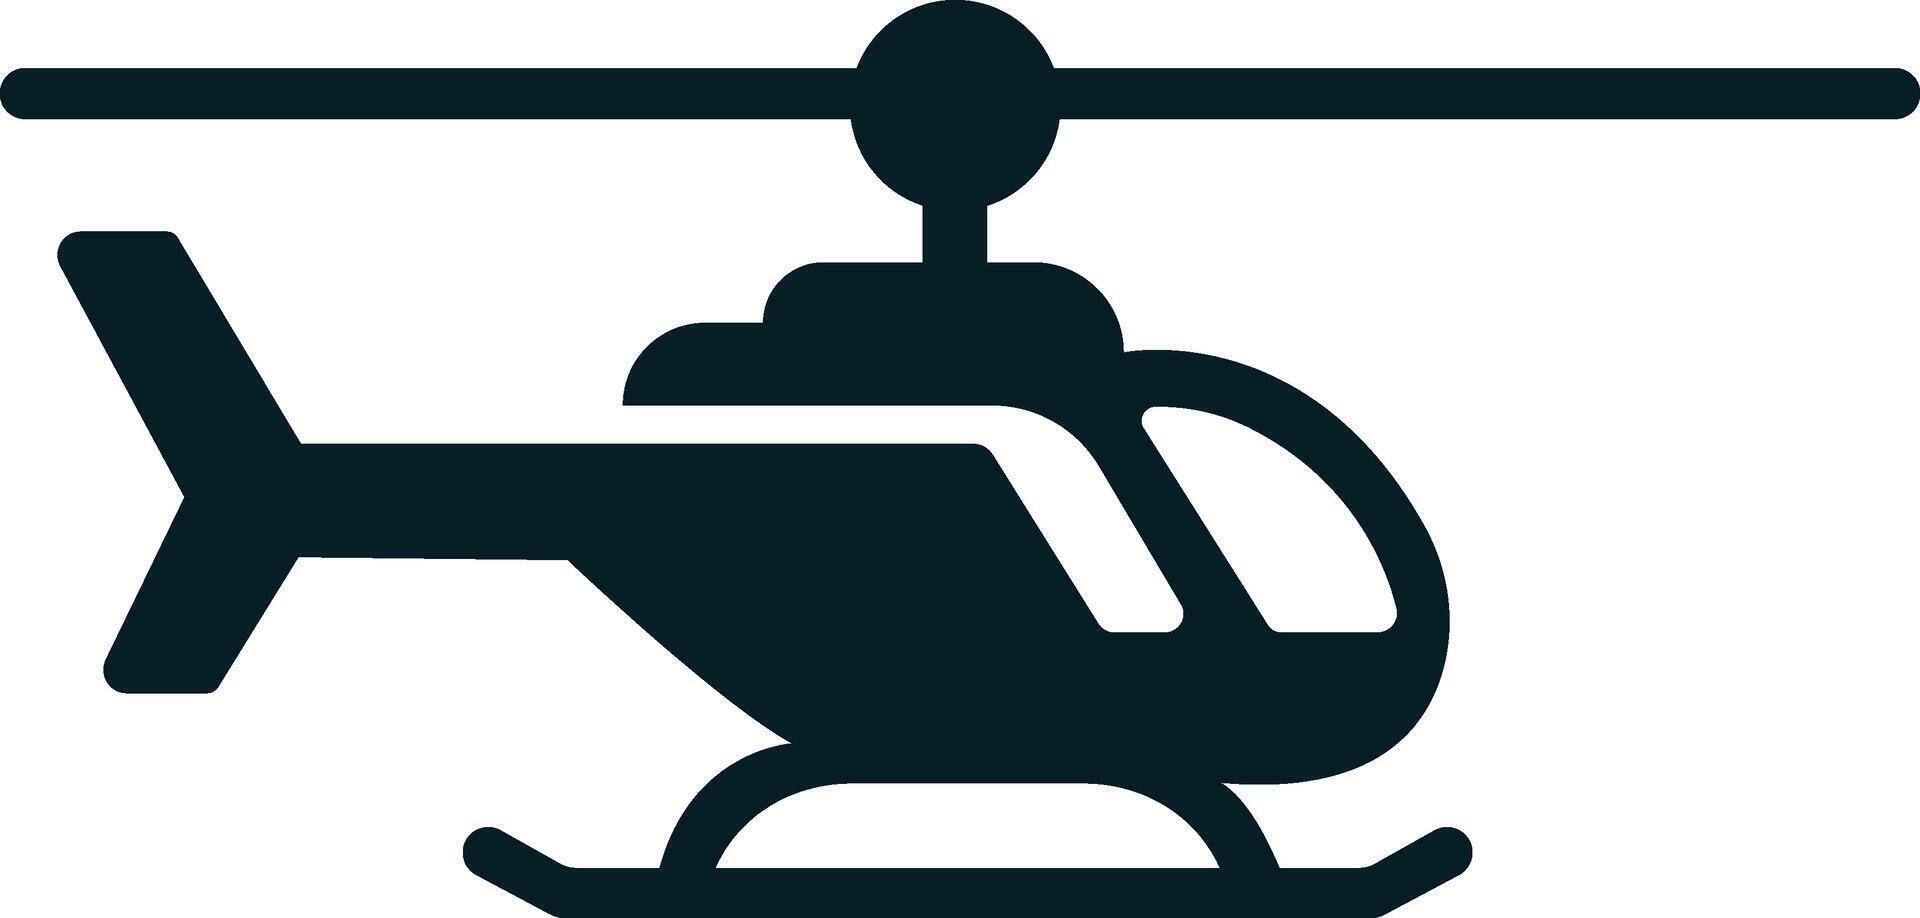 Helicopter Vector Illustration